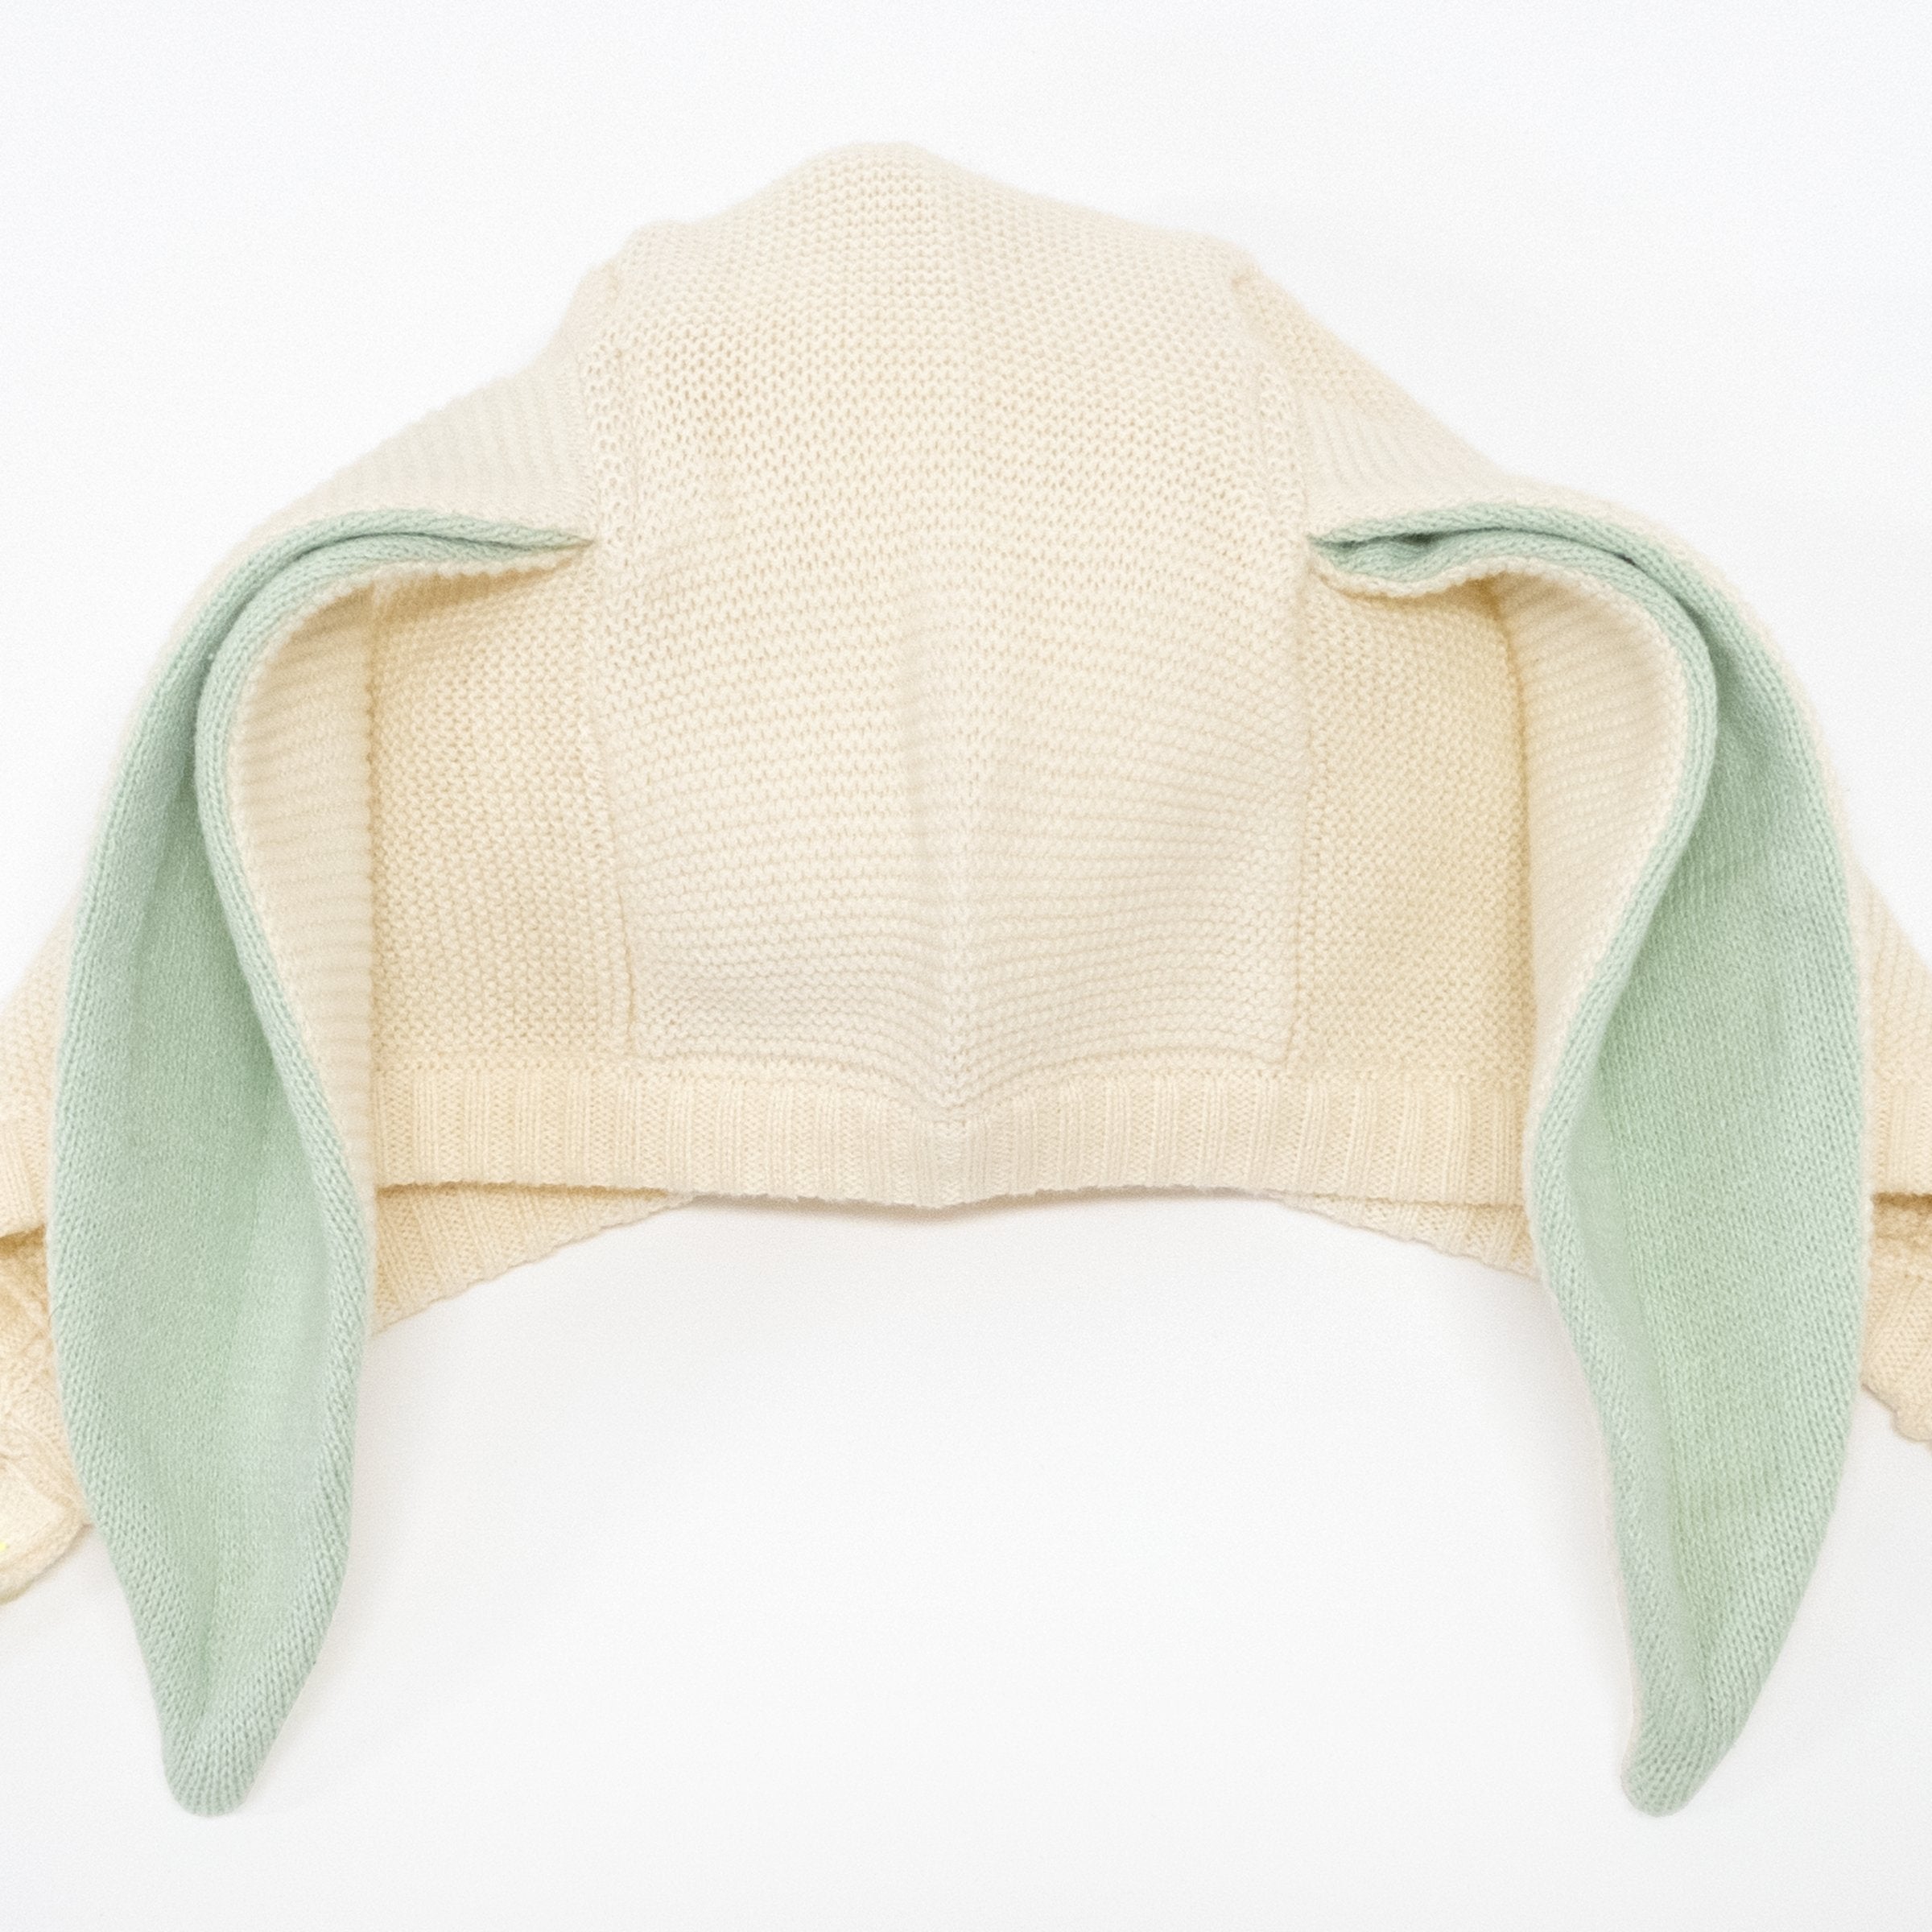 This delightful bunny baby bonnet is crafted from knitted organic cotton, with mint detail on the ears, and fastens with ivory coloured buttons.